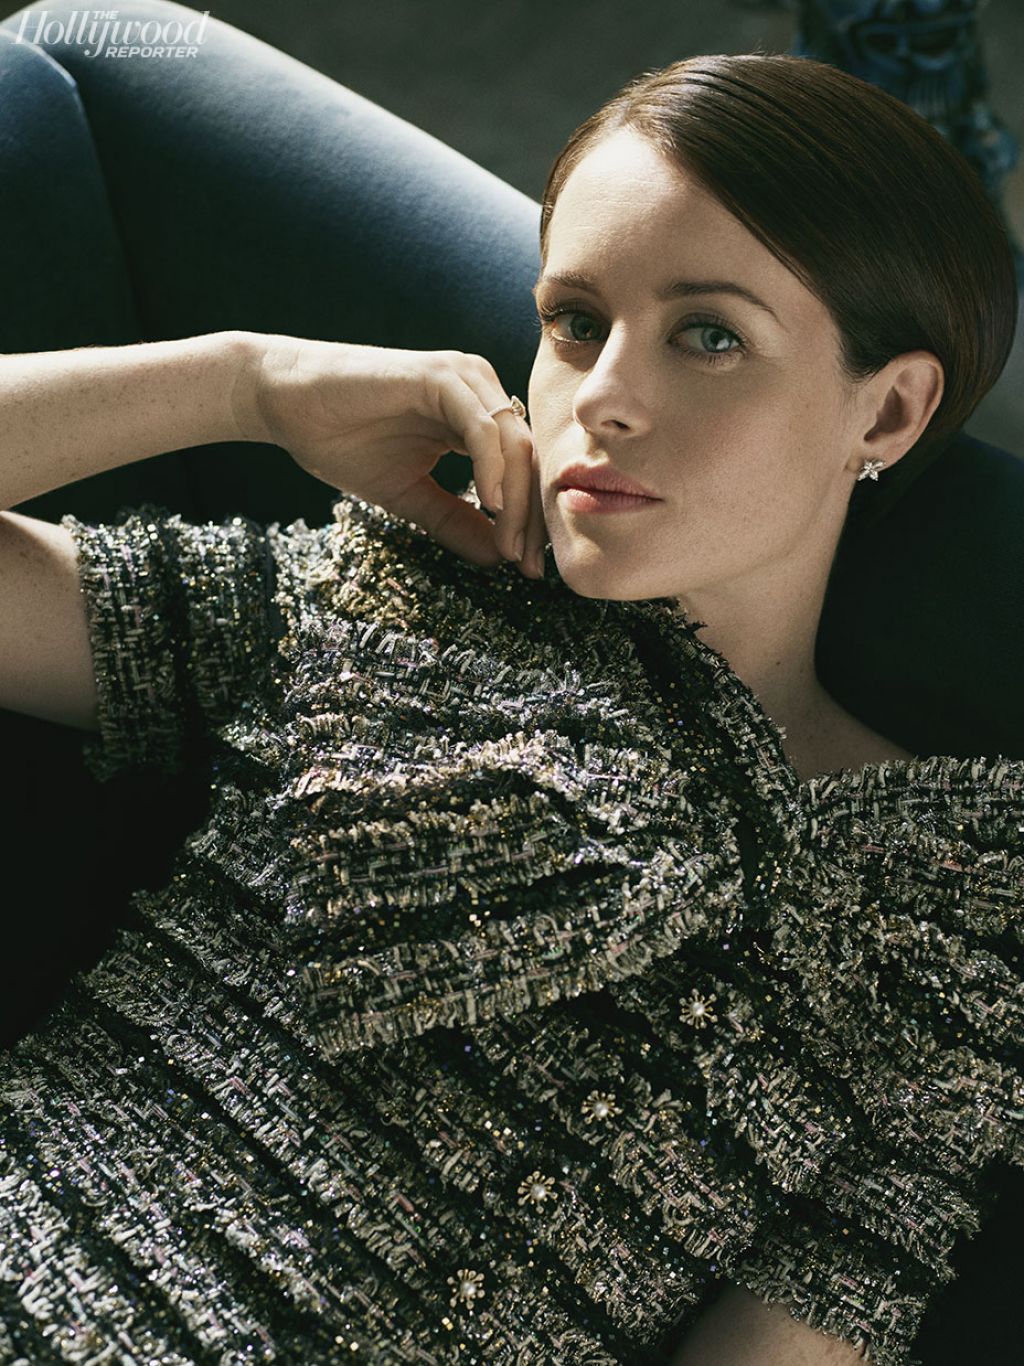 https://celebmafia.com/wp-content/uploads/2018/10/claire-foy-the-hollywood-reporter-october-2018-issue-3.jpg